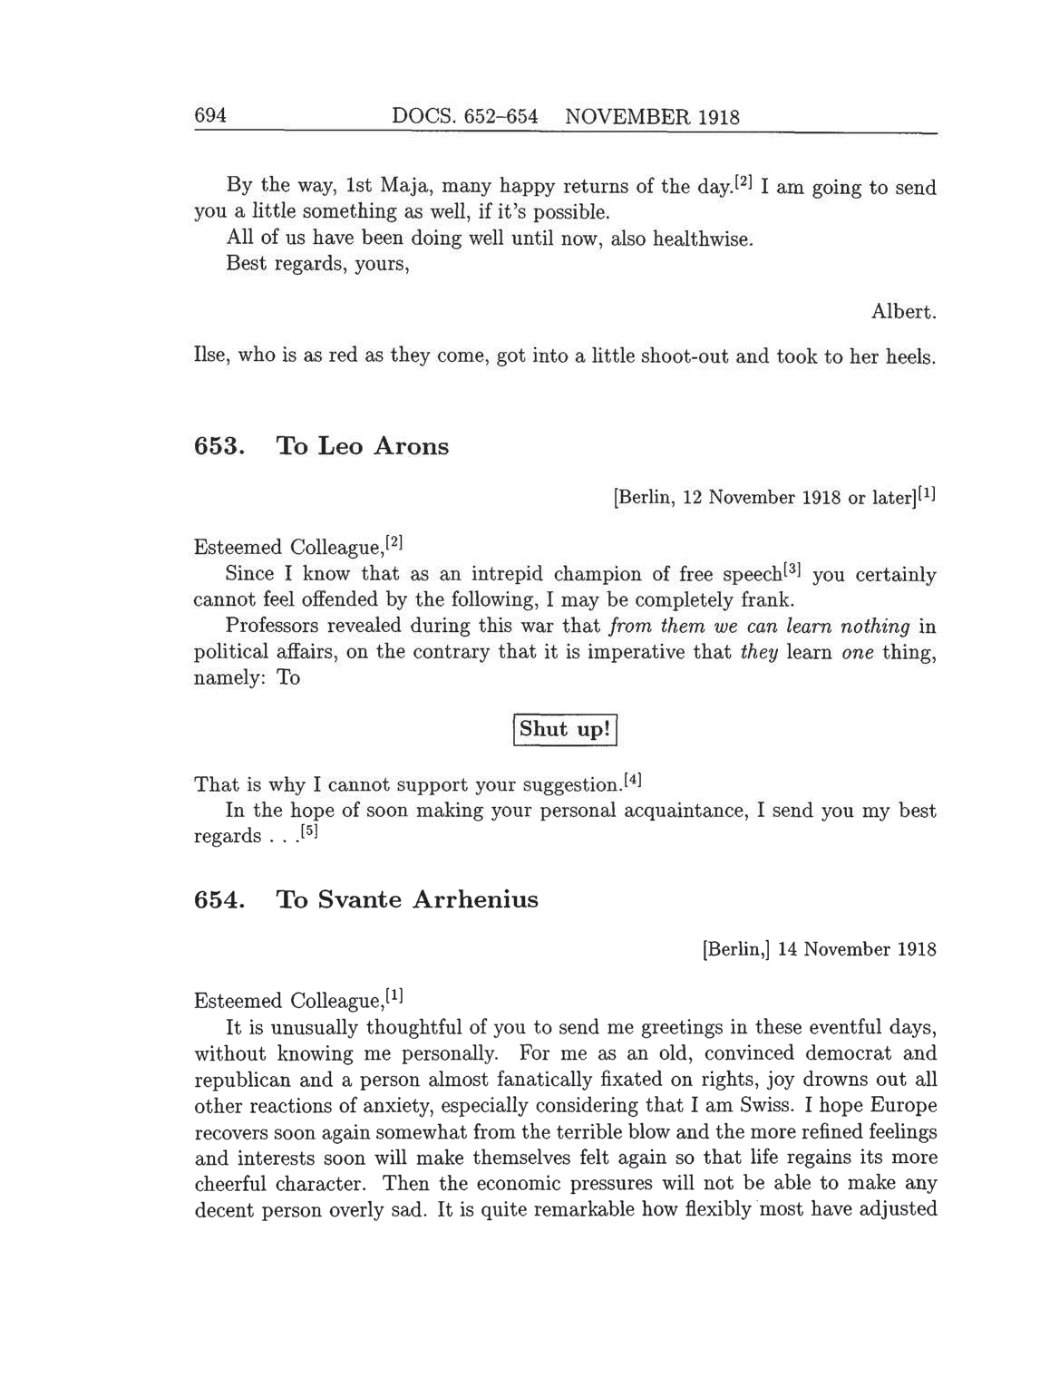 Volume 8: The Berlin Years: Correspondence, 1914-1918 (English translation supplement) page 694